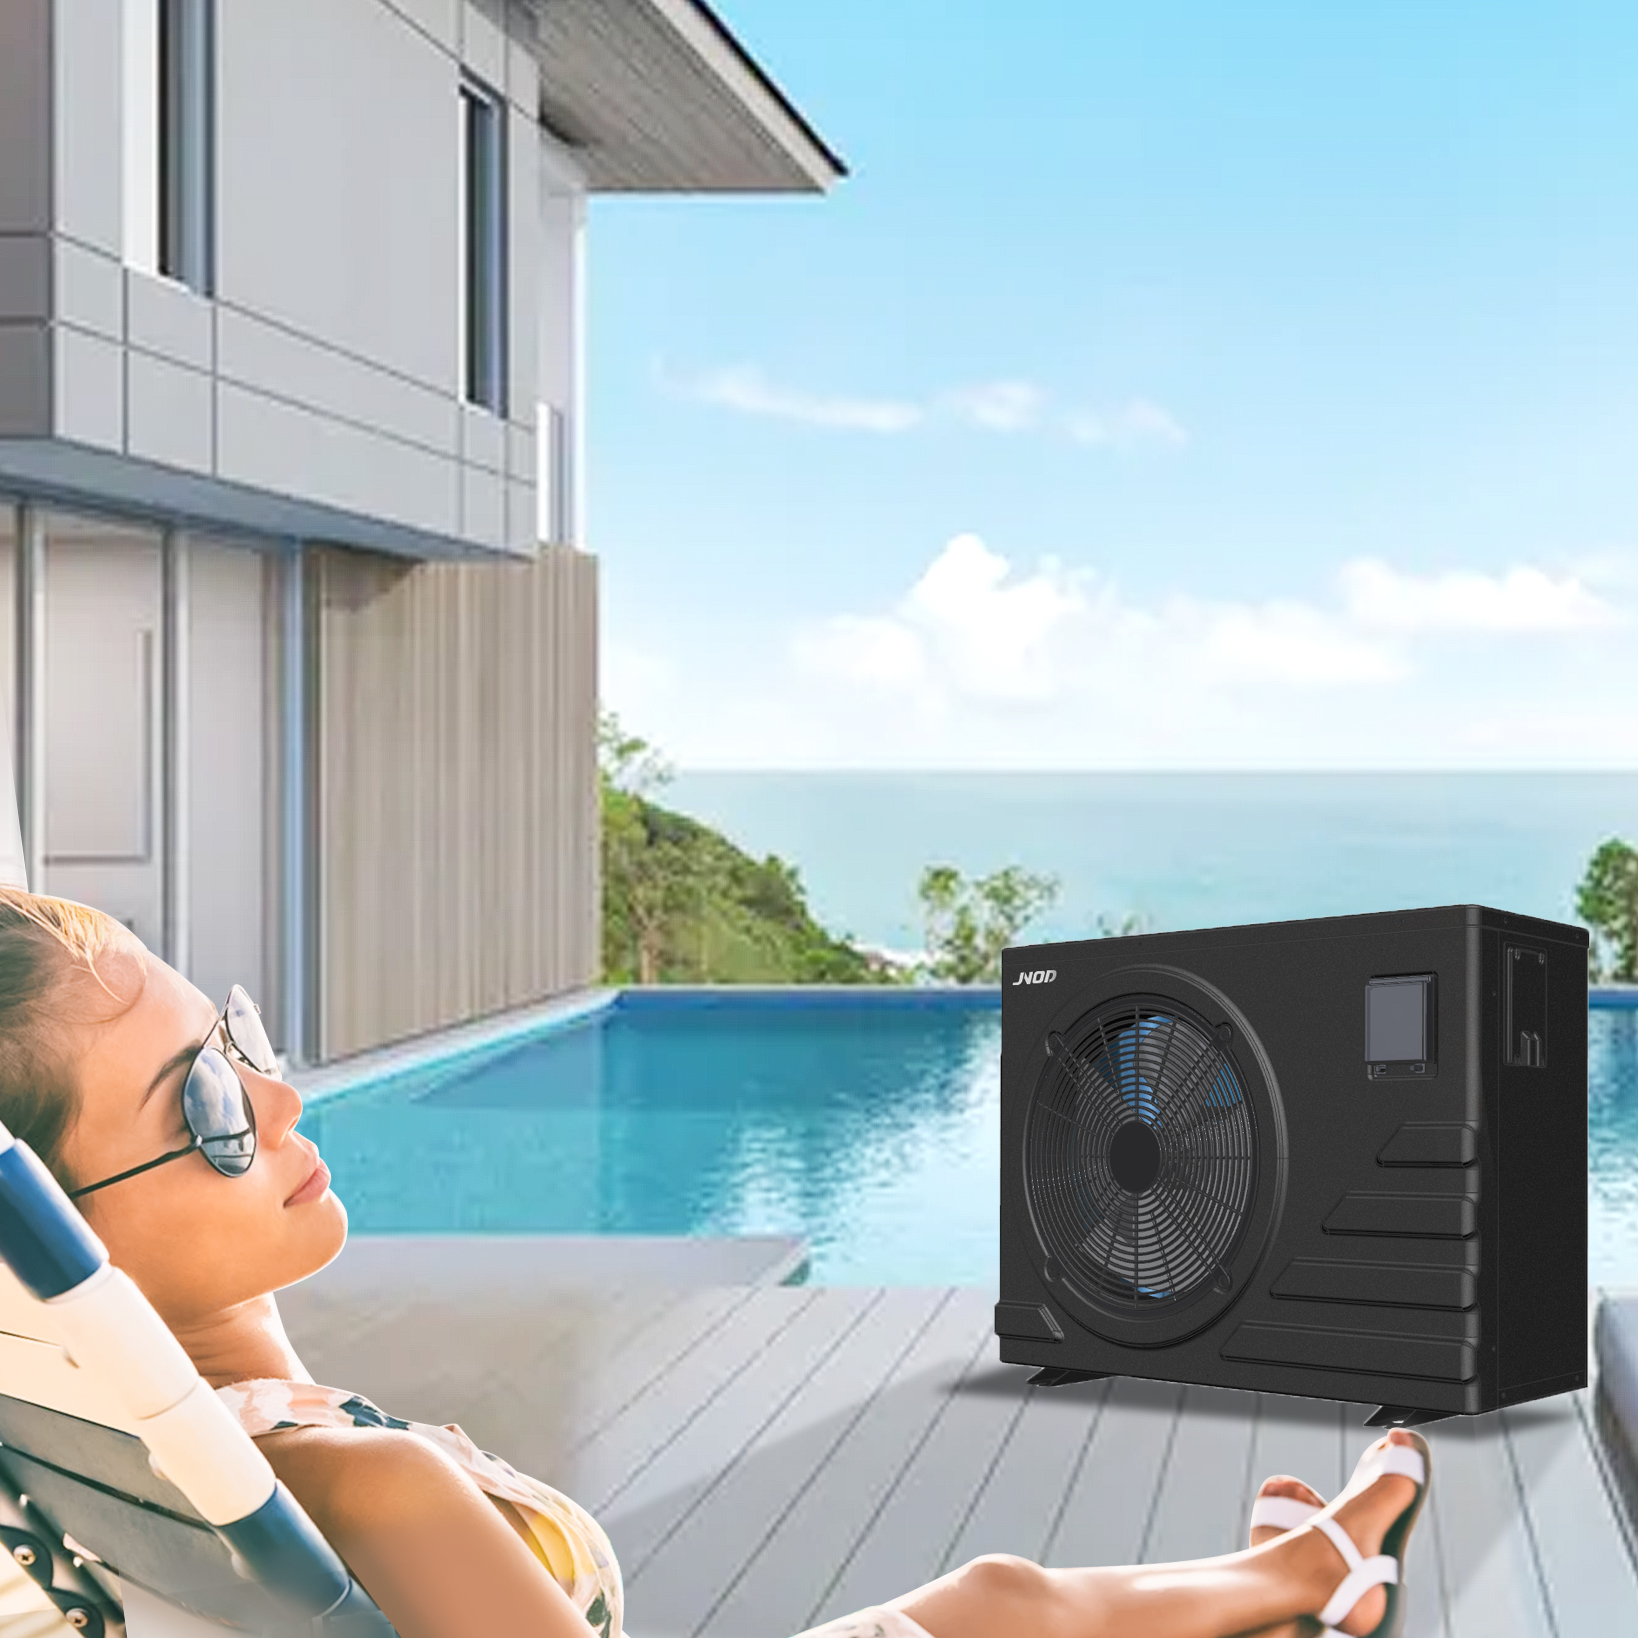 Inverter Low Ambient Swimming Pool Heat Pump For Hotels